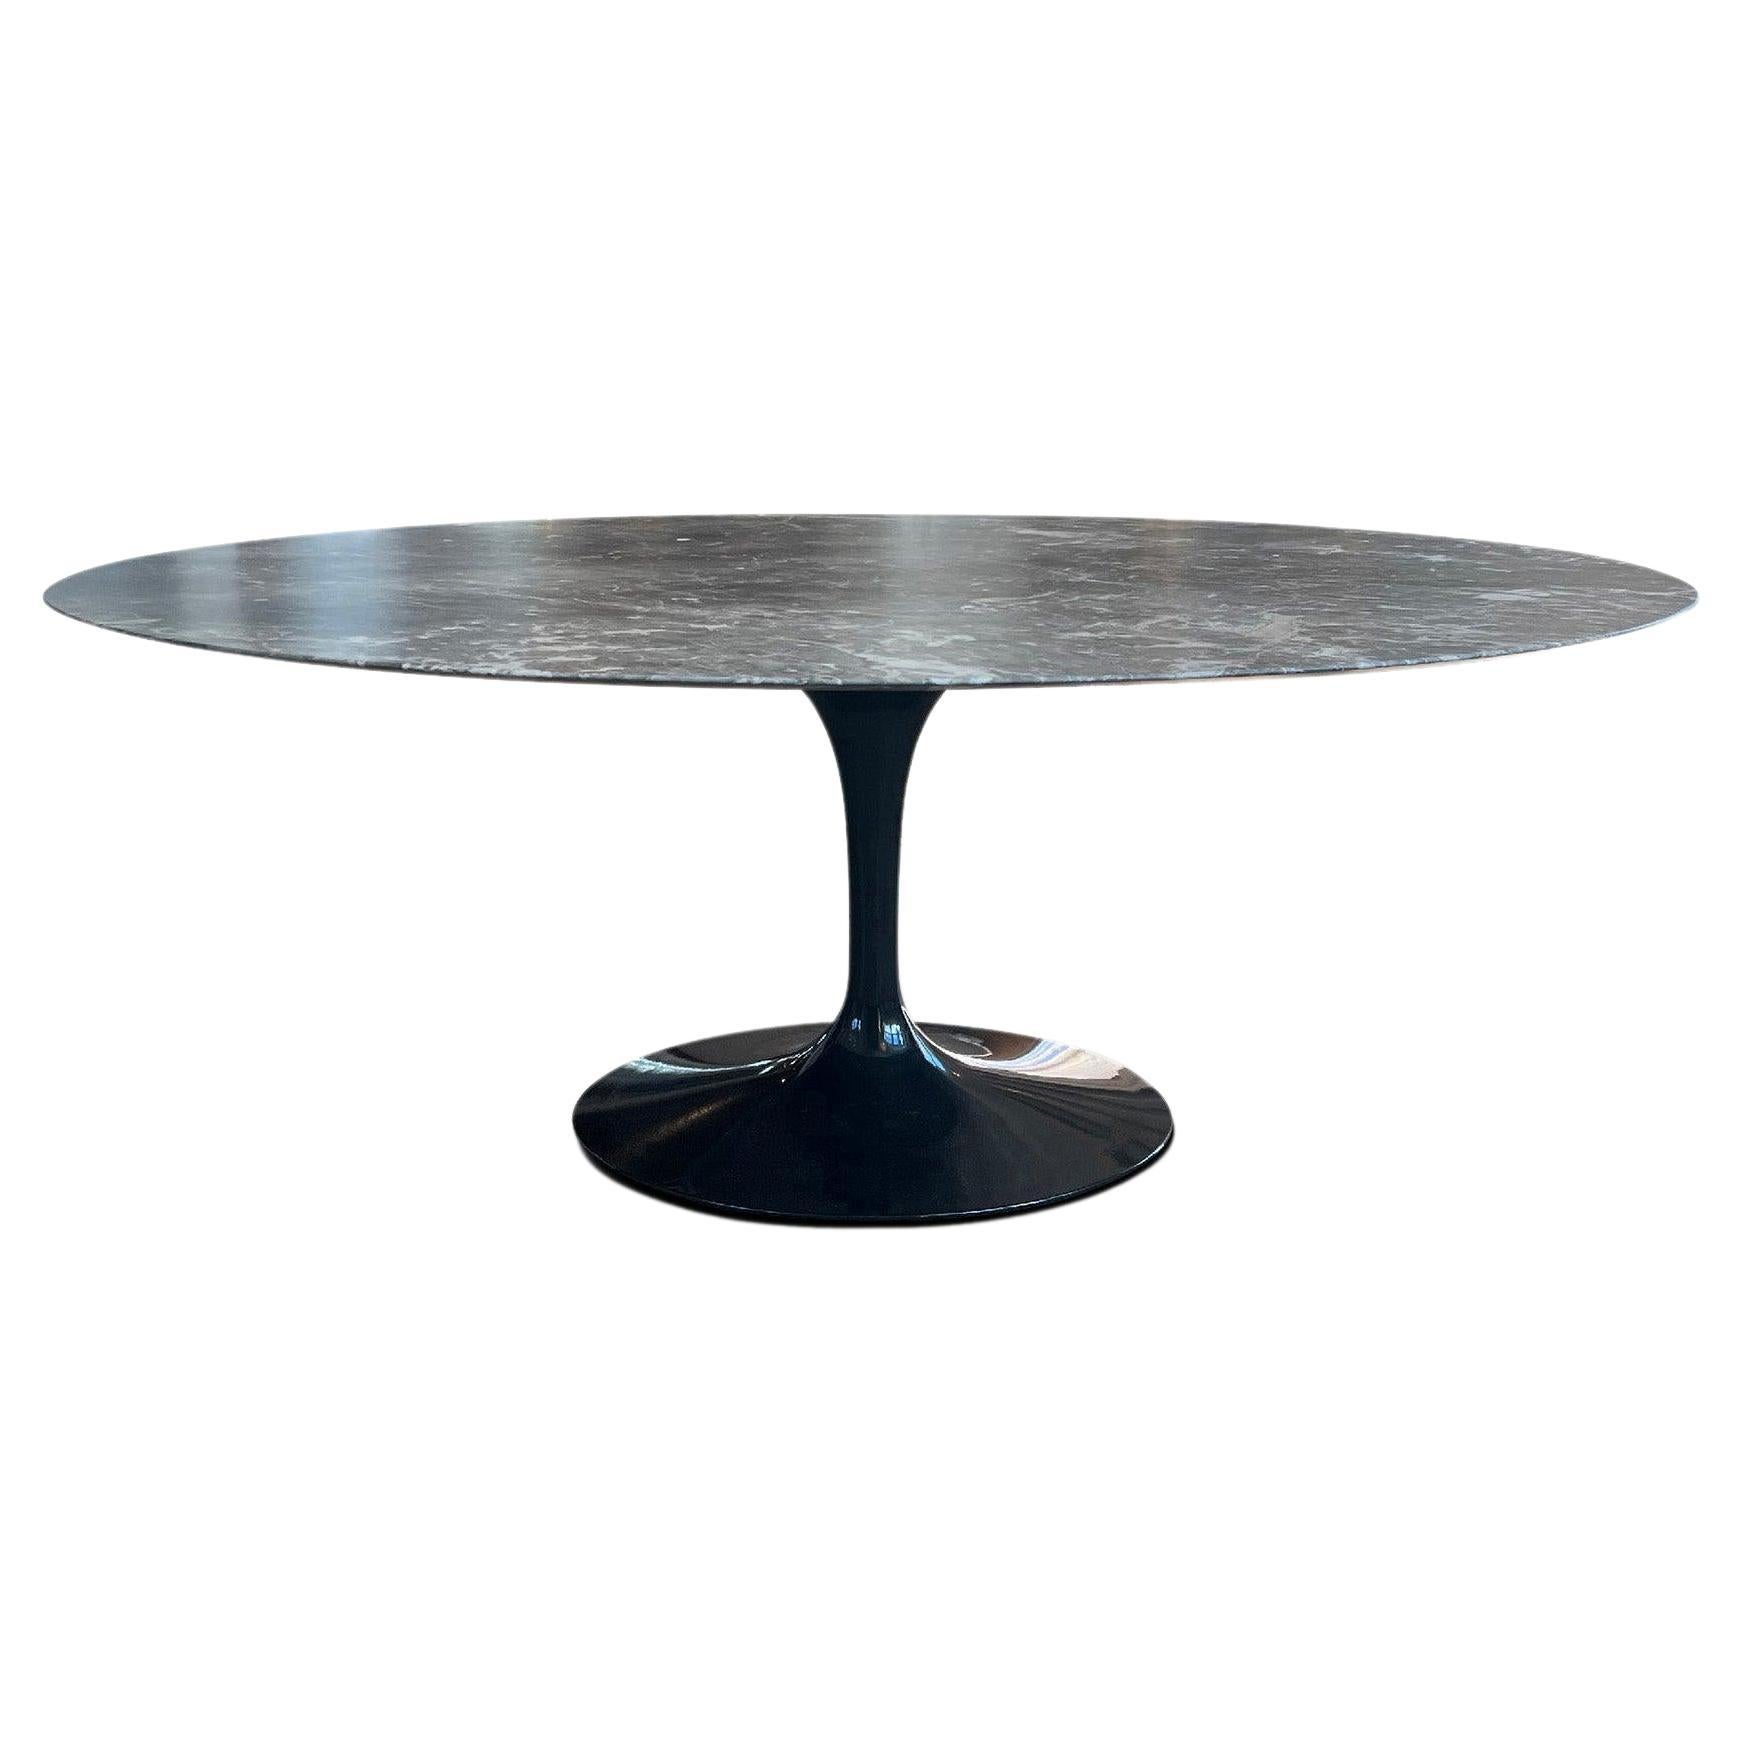 Eero Saarinen Medium Oval Grey Marble Dining Table with Black Base by Knoll For Sale